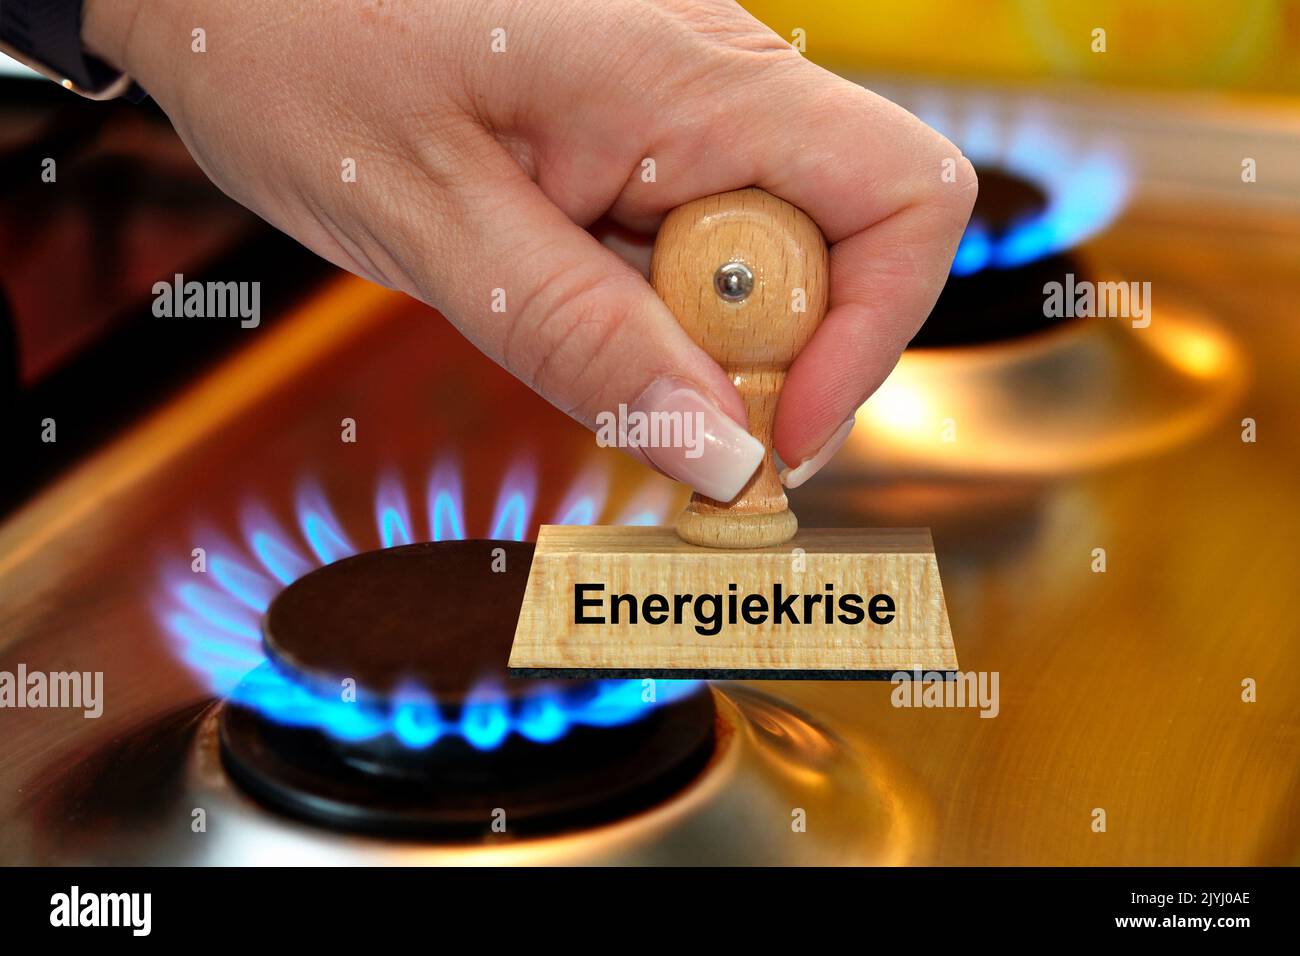 woman's hand with stamp lettering Energiekrise, energy crisis, gas cooker in the background, Germany Stock Photo